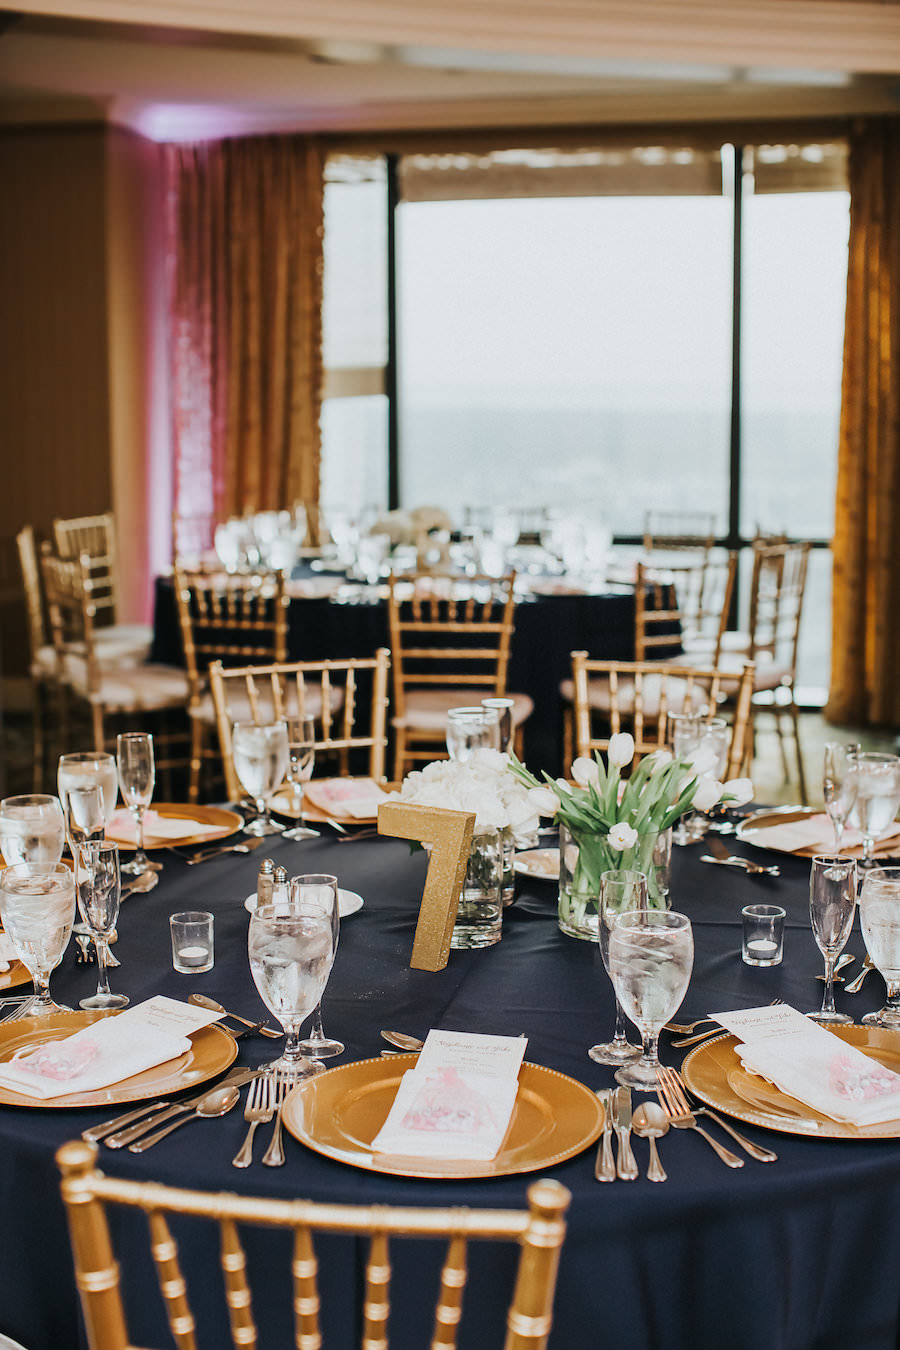 Elegant Gold Wedding Reception with Navy Blue Linens and Gold Chiavari Chairs with Gold Glitter Table Numbers | Wedding Reception Decor Inspiration and Ideas